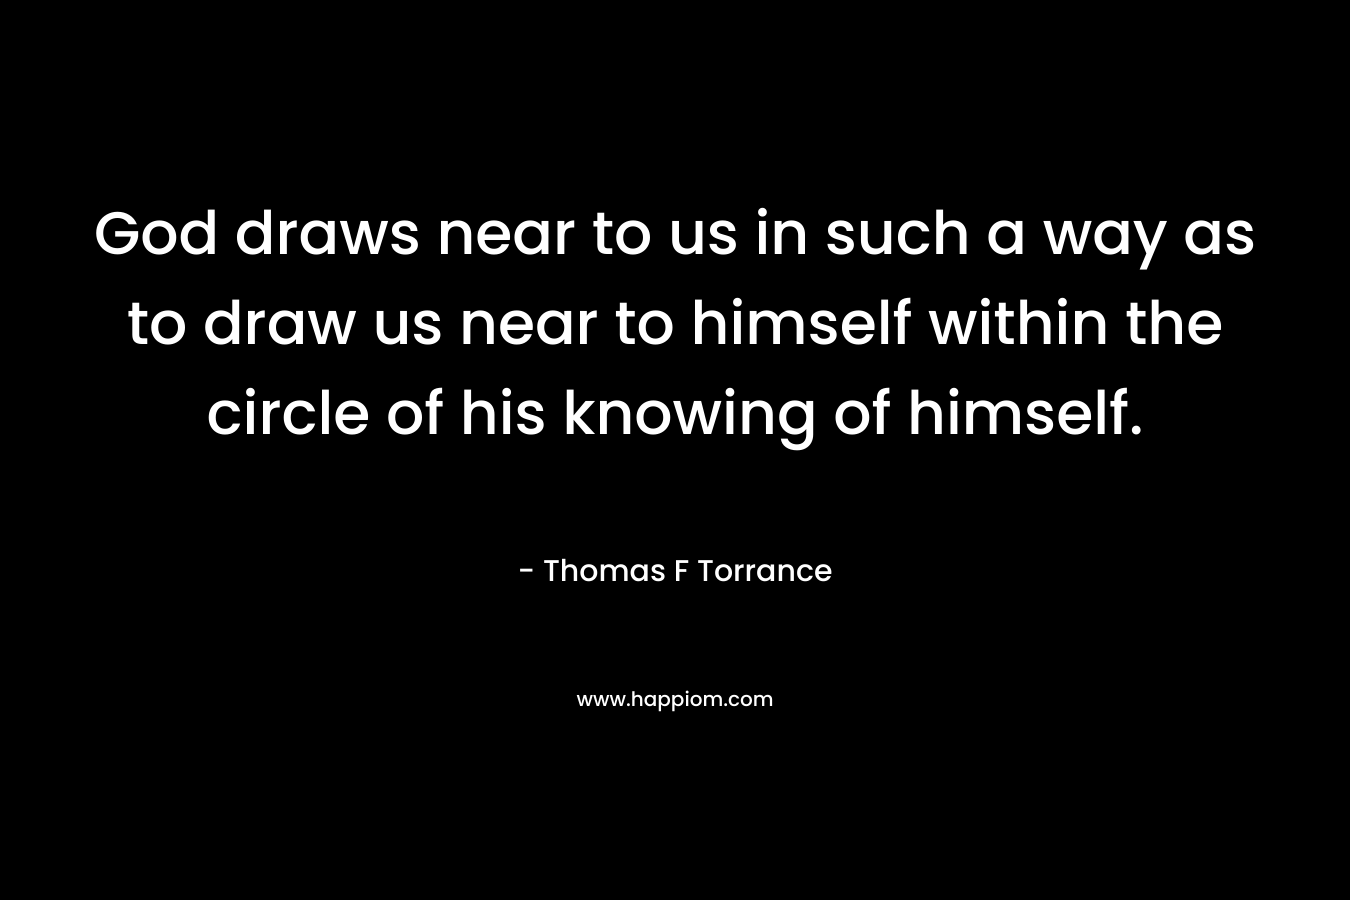 God draws near to us in such a way as to draw us near to himself within the circle of his knowing of himself. – Thomas F Torrance